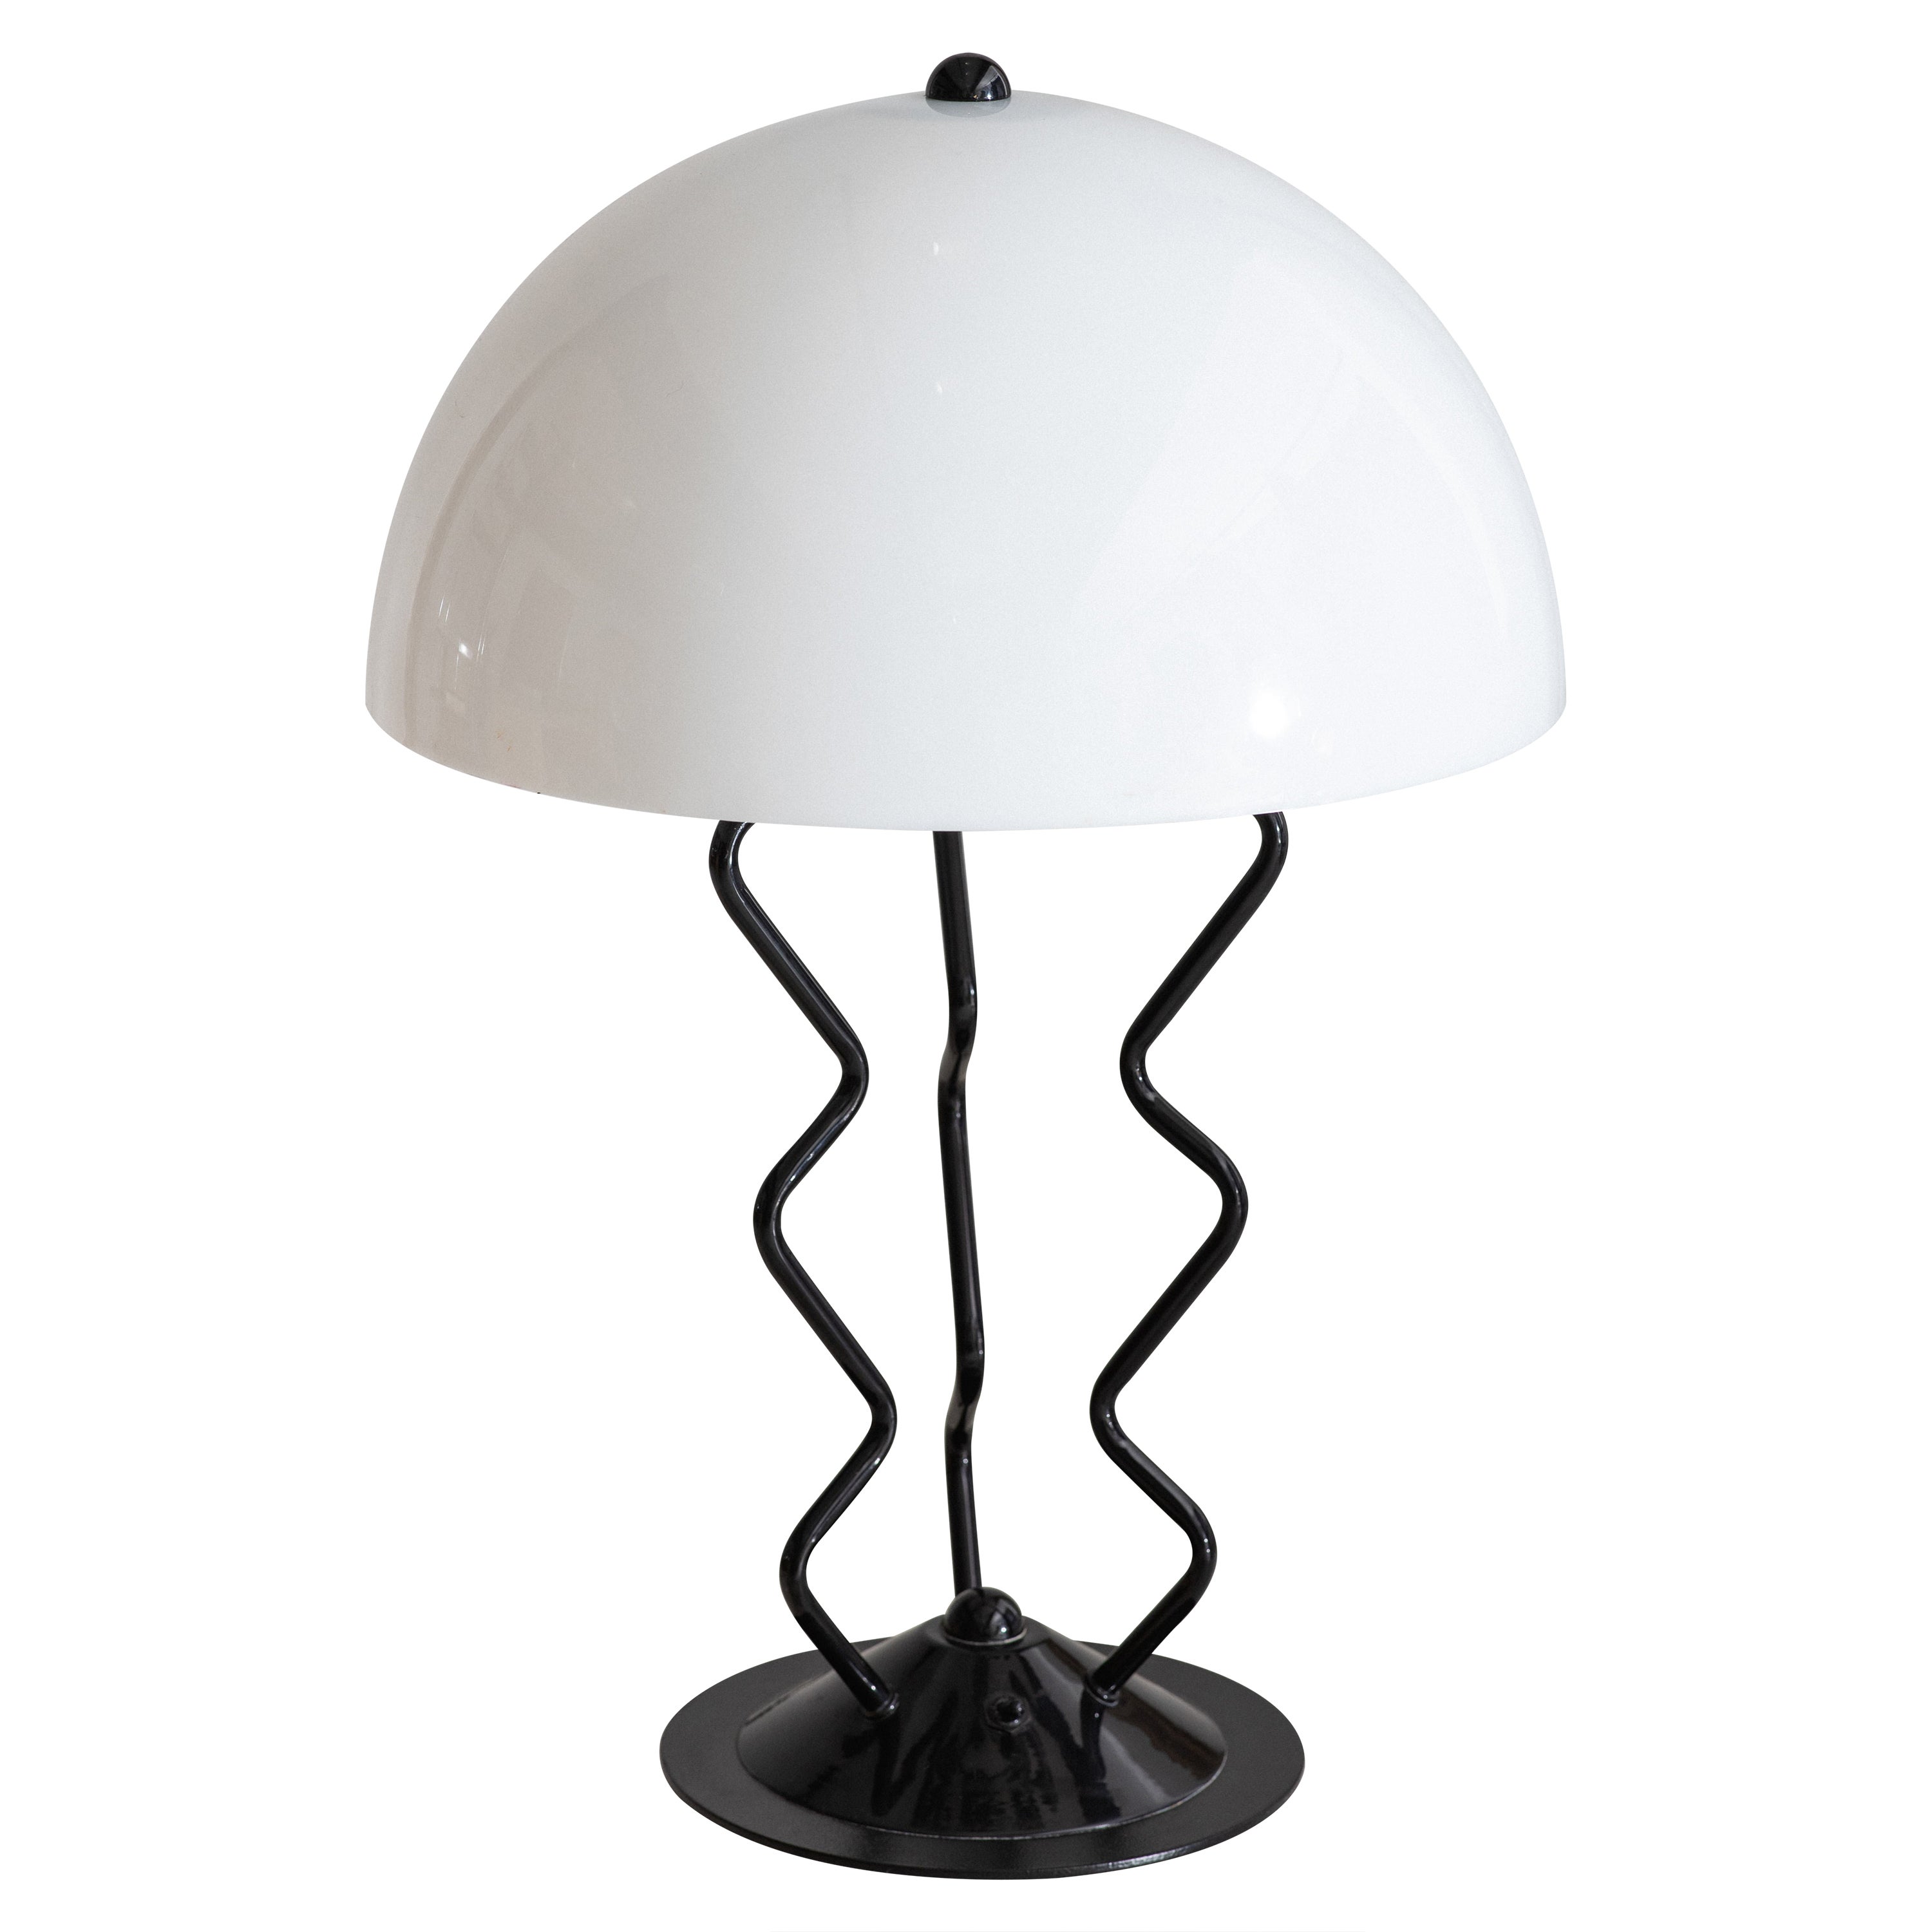 Memphis Style Metal Squiggle Table Lamp, Brushed Steel Dome Table Lamp